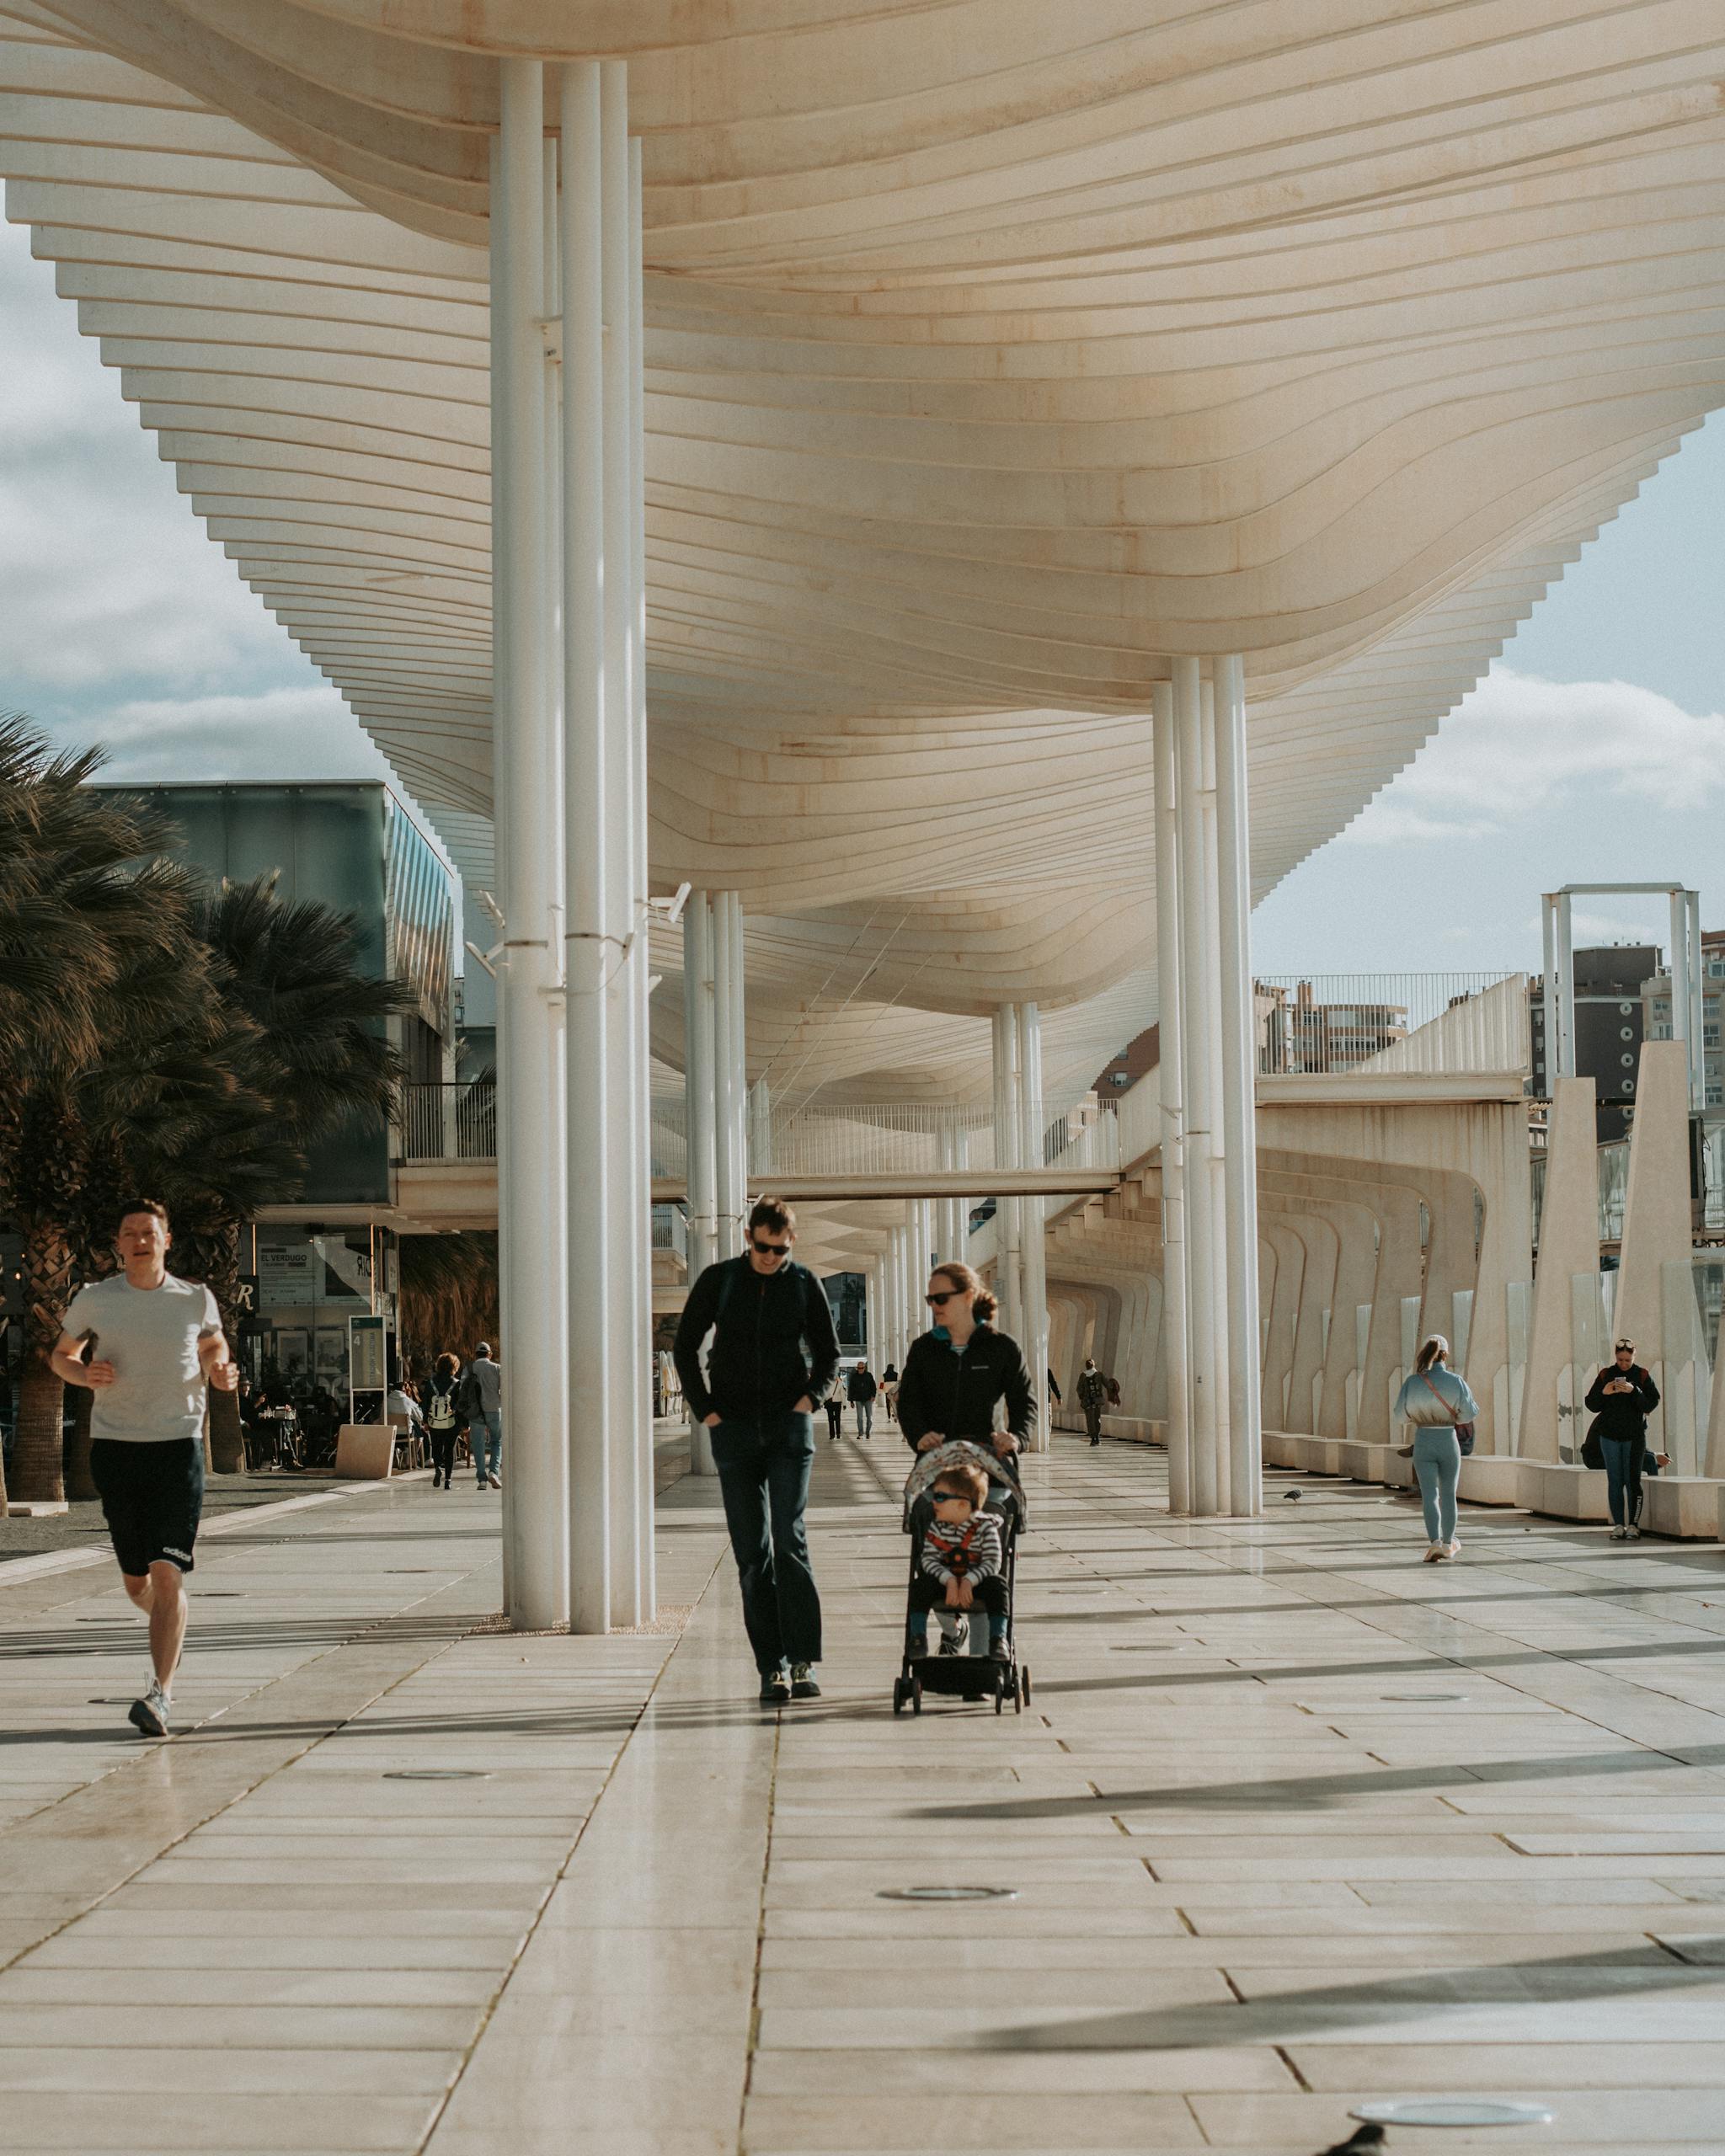 View of Pedestrians Walking at the Muelle Uno in Malaga, Spain